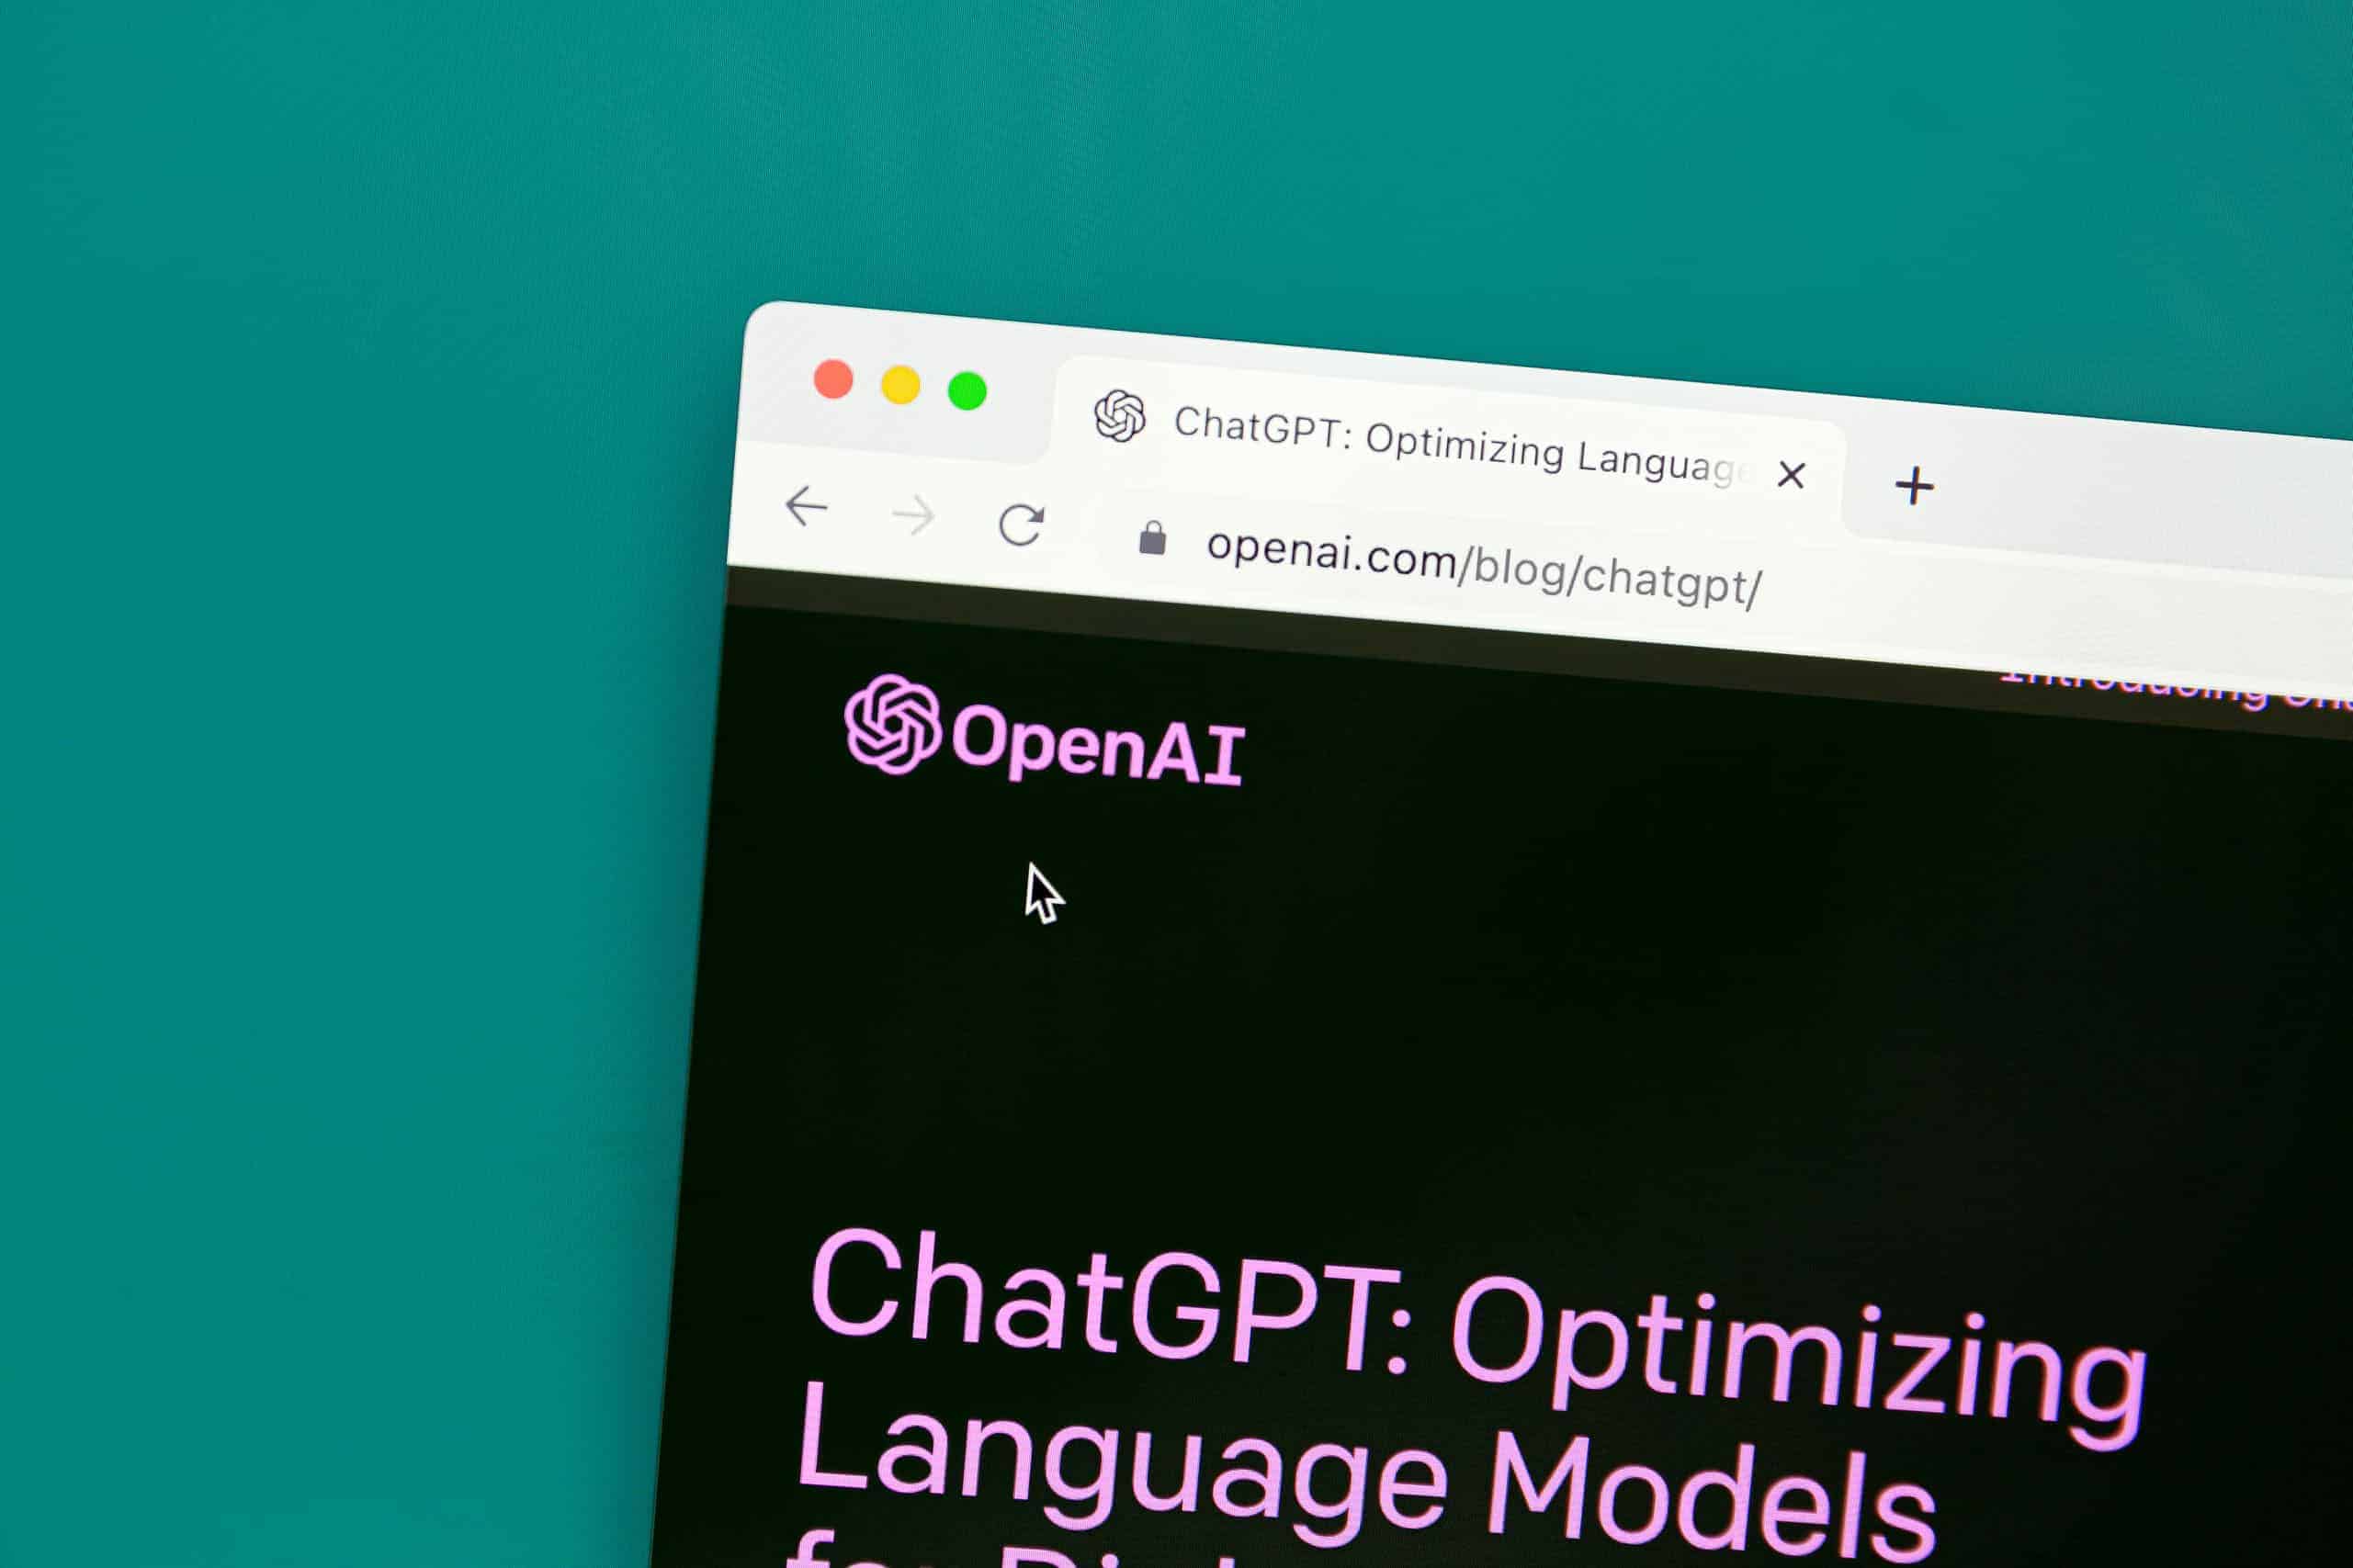 Openai Reverses Stance, Allows Military Applications